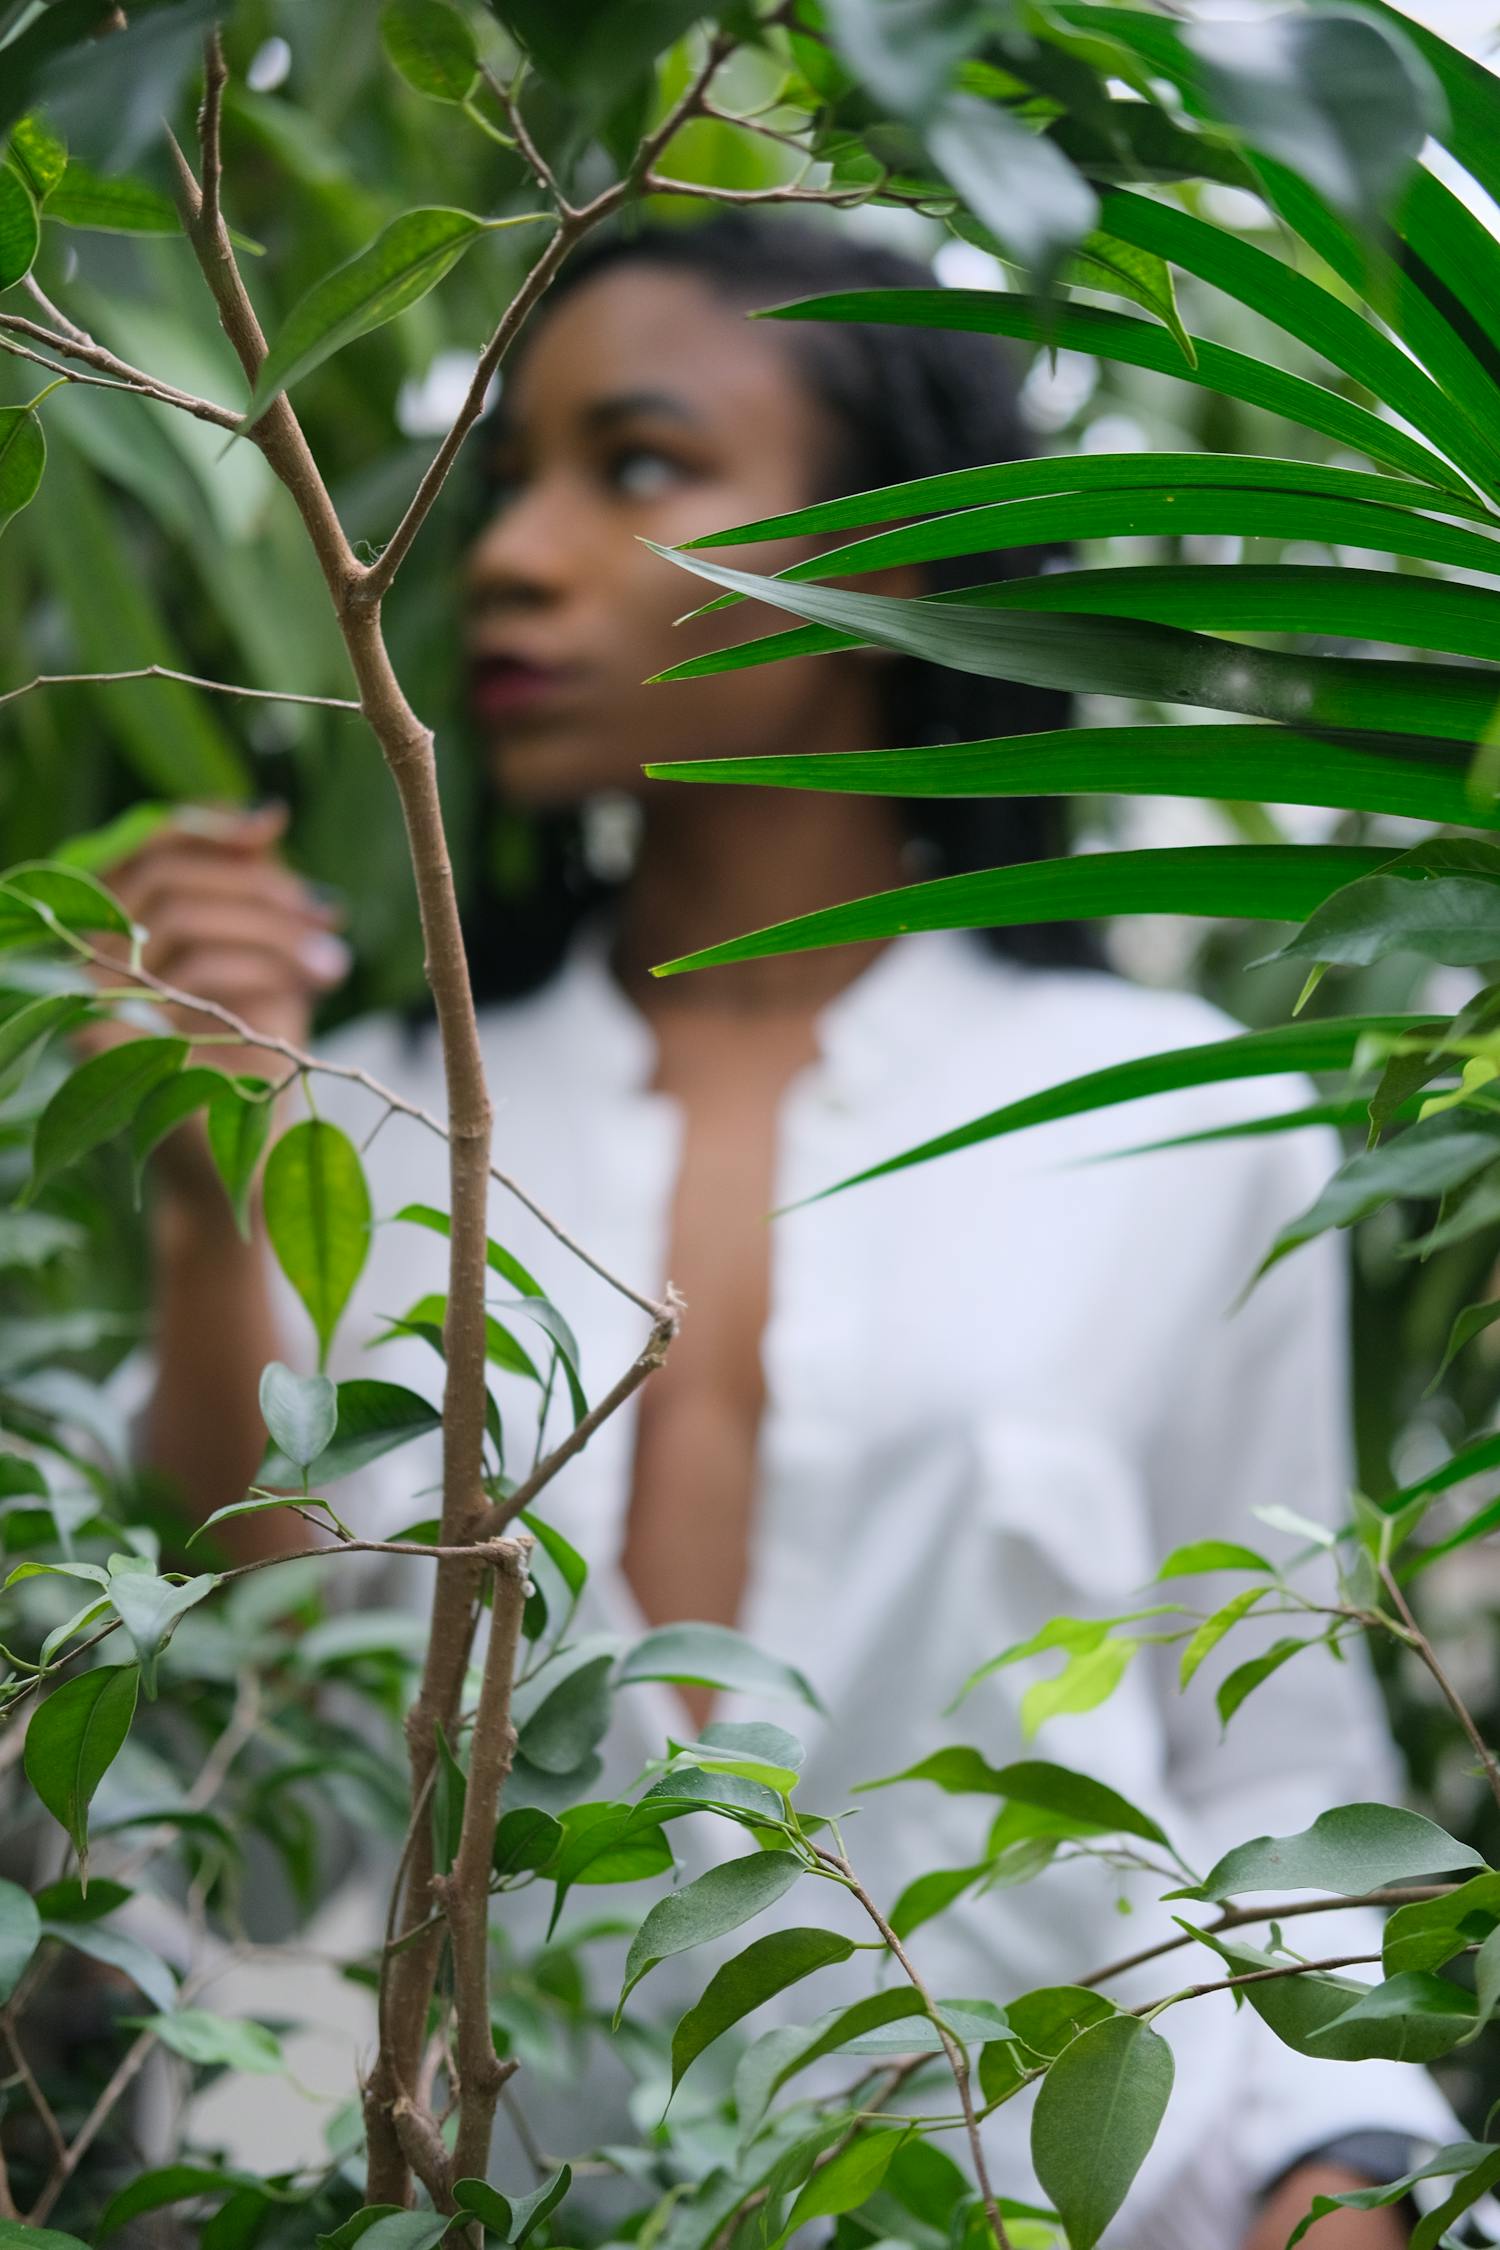 Selective Focus of Green Leaf Plant Near Woman Wearing White Shirt